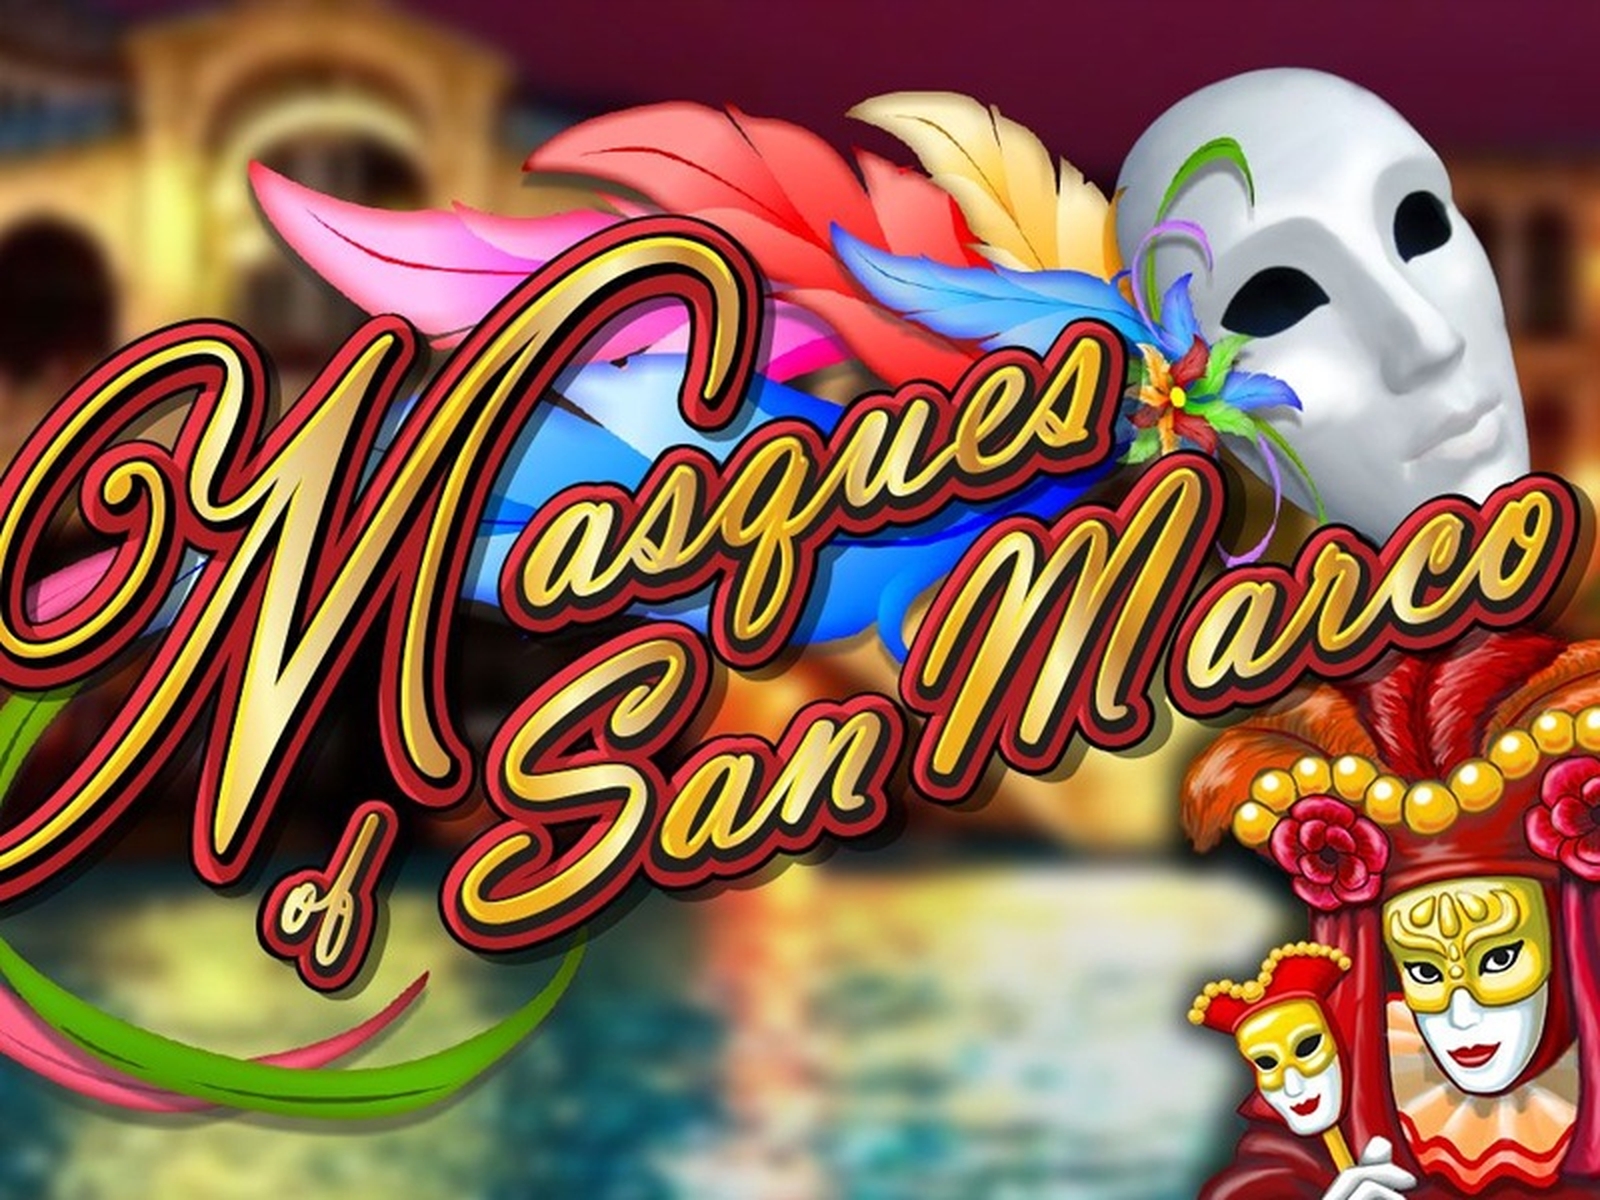 Masques of San Marco demo